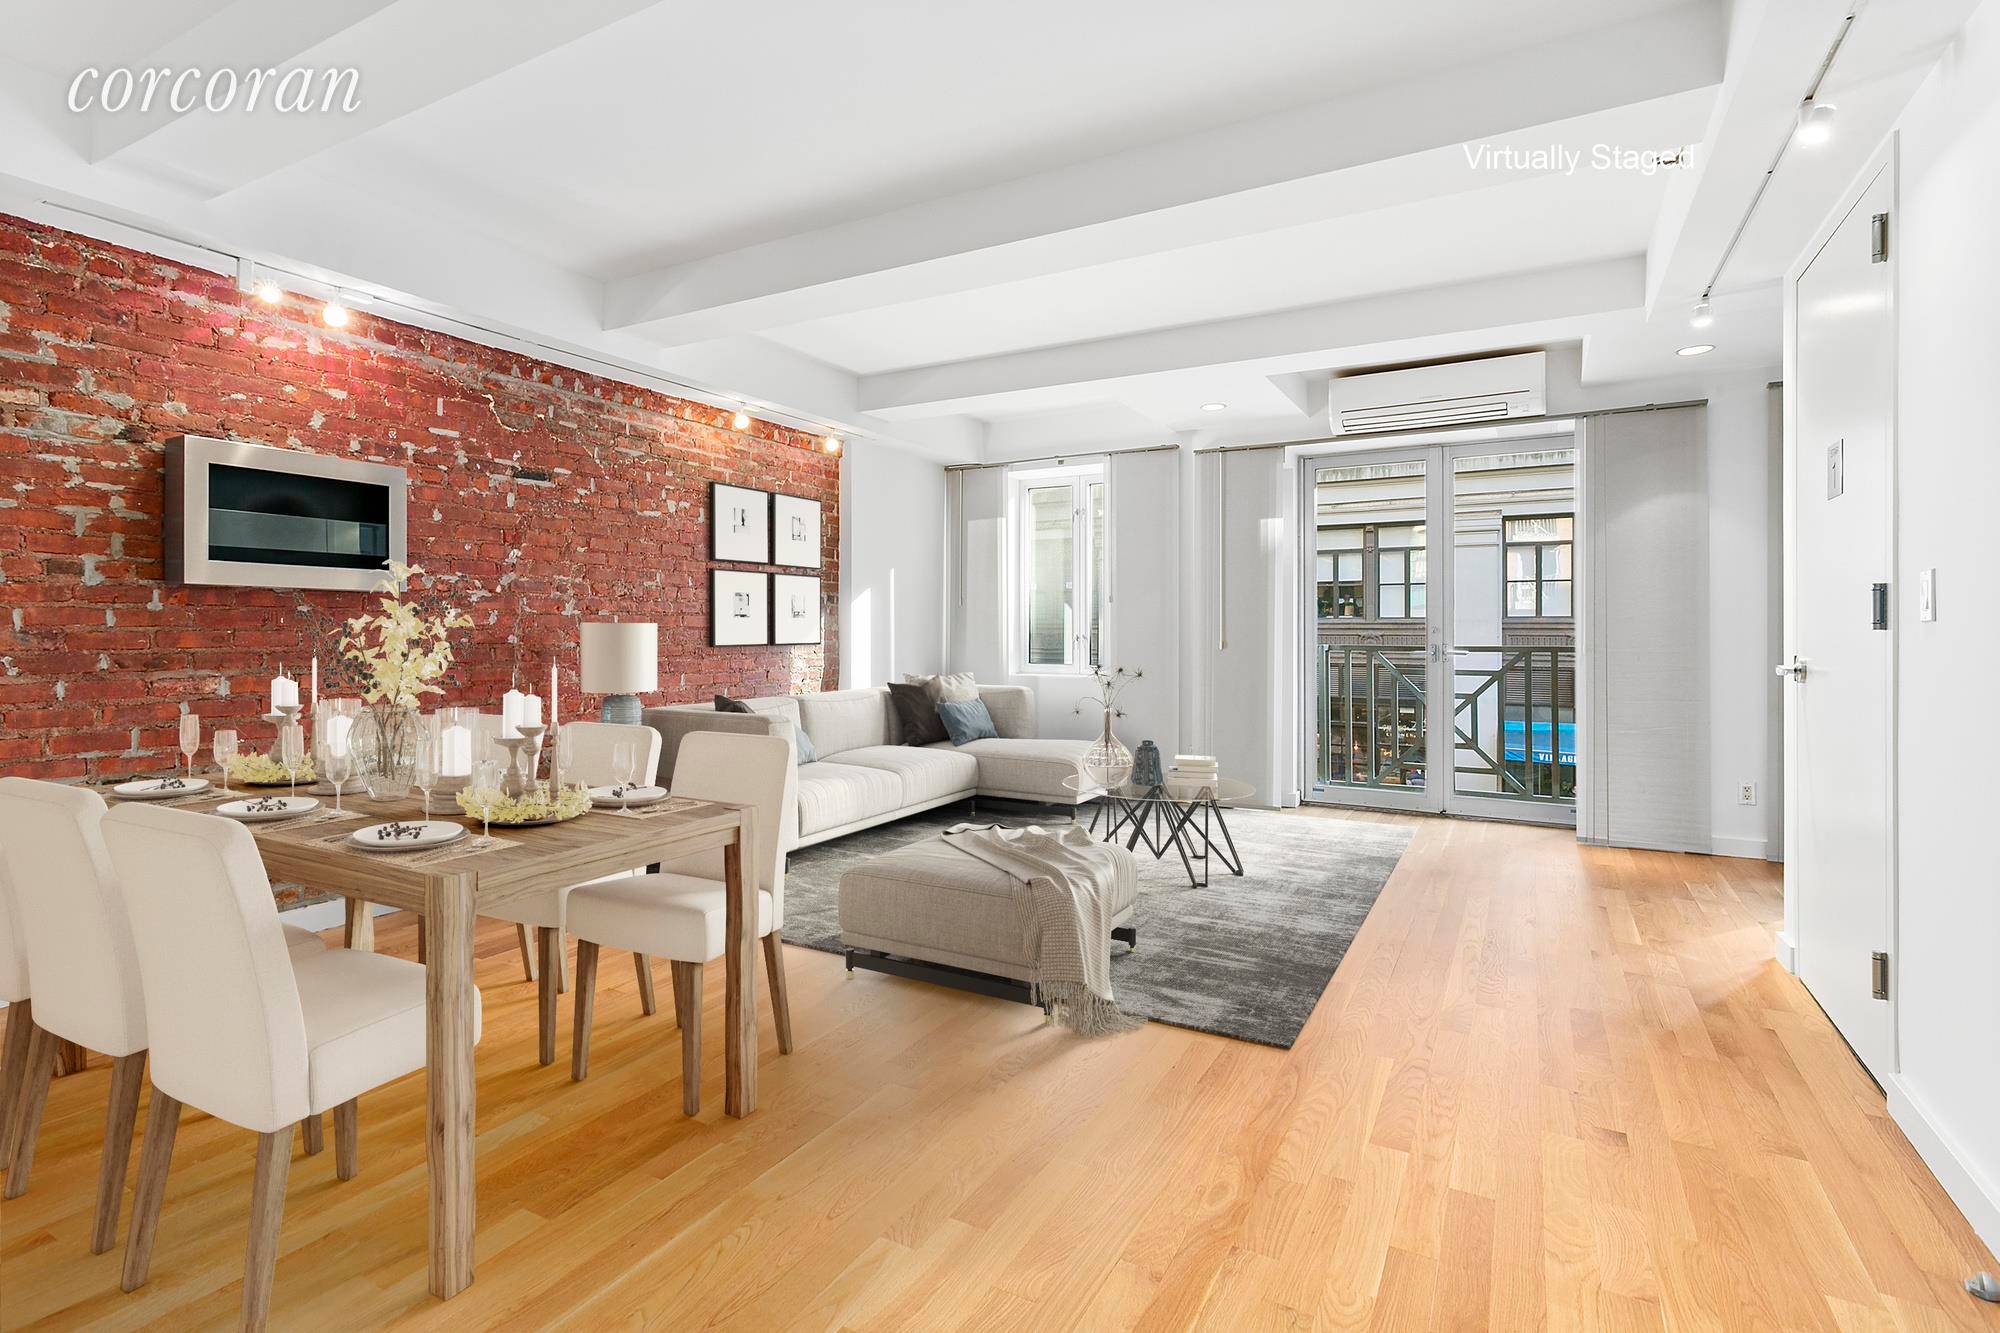 Brand new to market is a rare, floor through 1265 sqft 2 bed, 2 bath pet friendly condominium only blocks from Washington Square Park and Union Square Park.